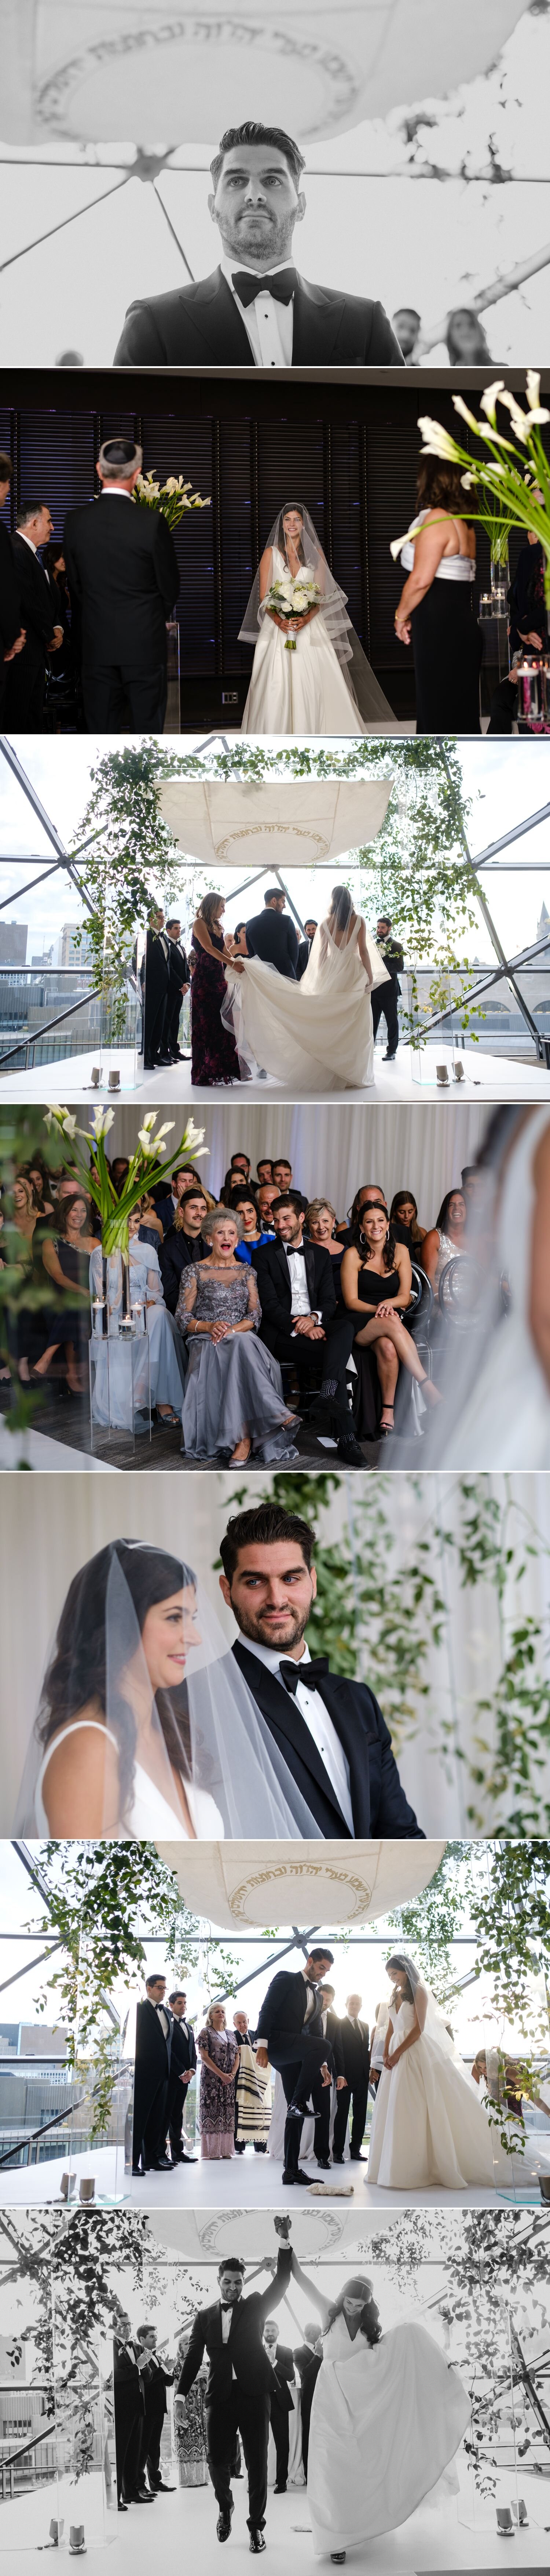 candid moments during a jewish wedding ceremony at the shaw centre in ottawa